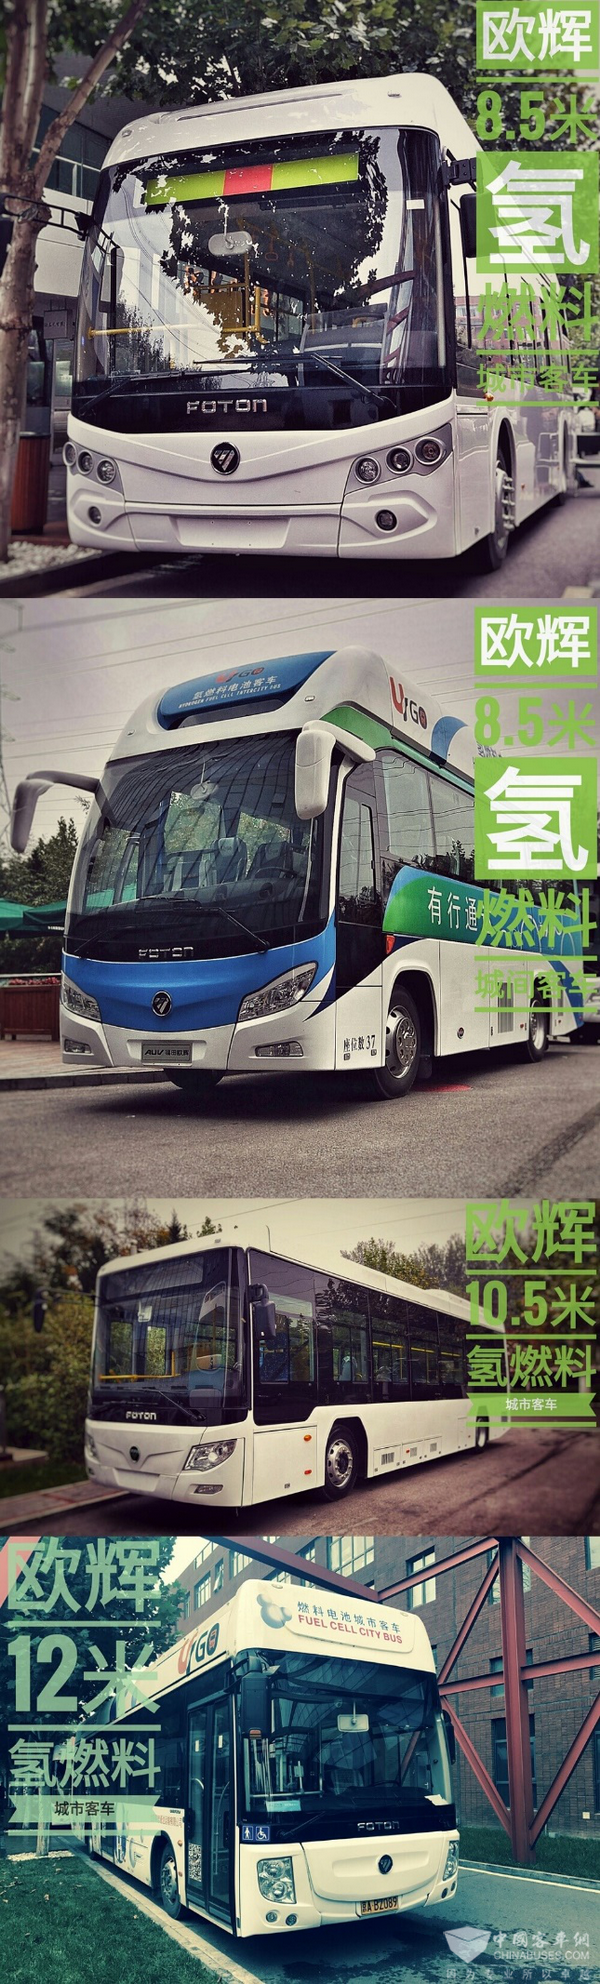 Foton AUV Takes the Lead in Fuel Cell Bus Development